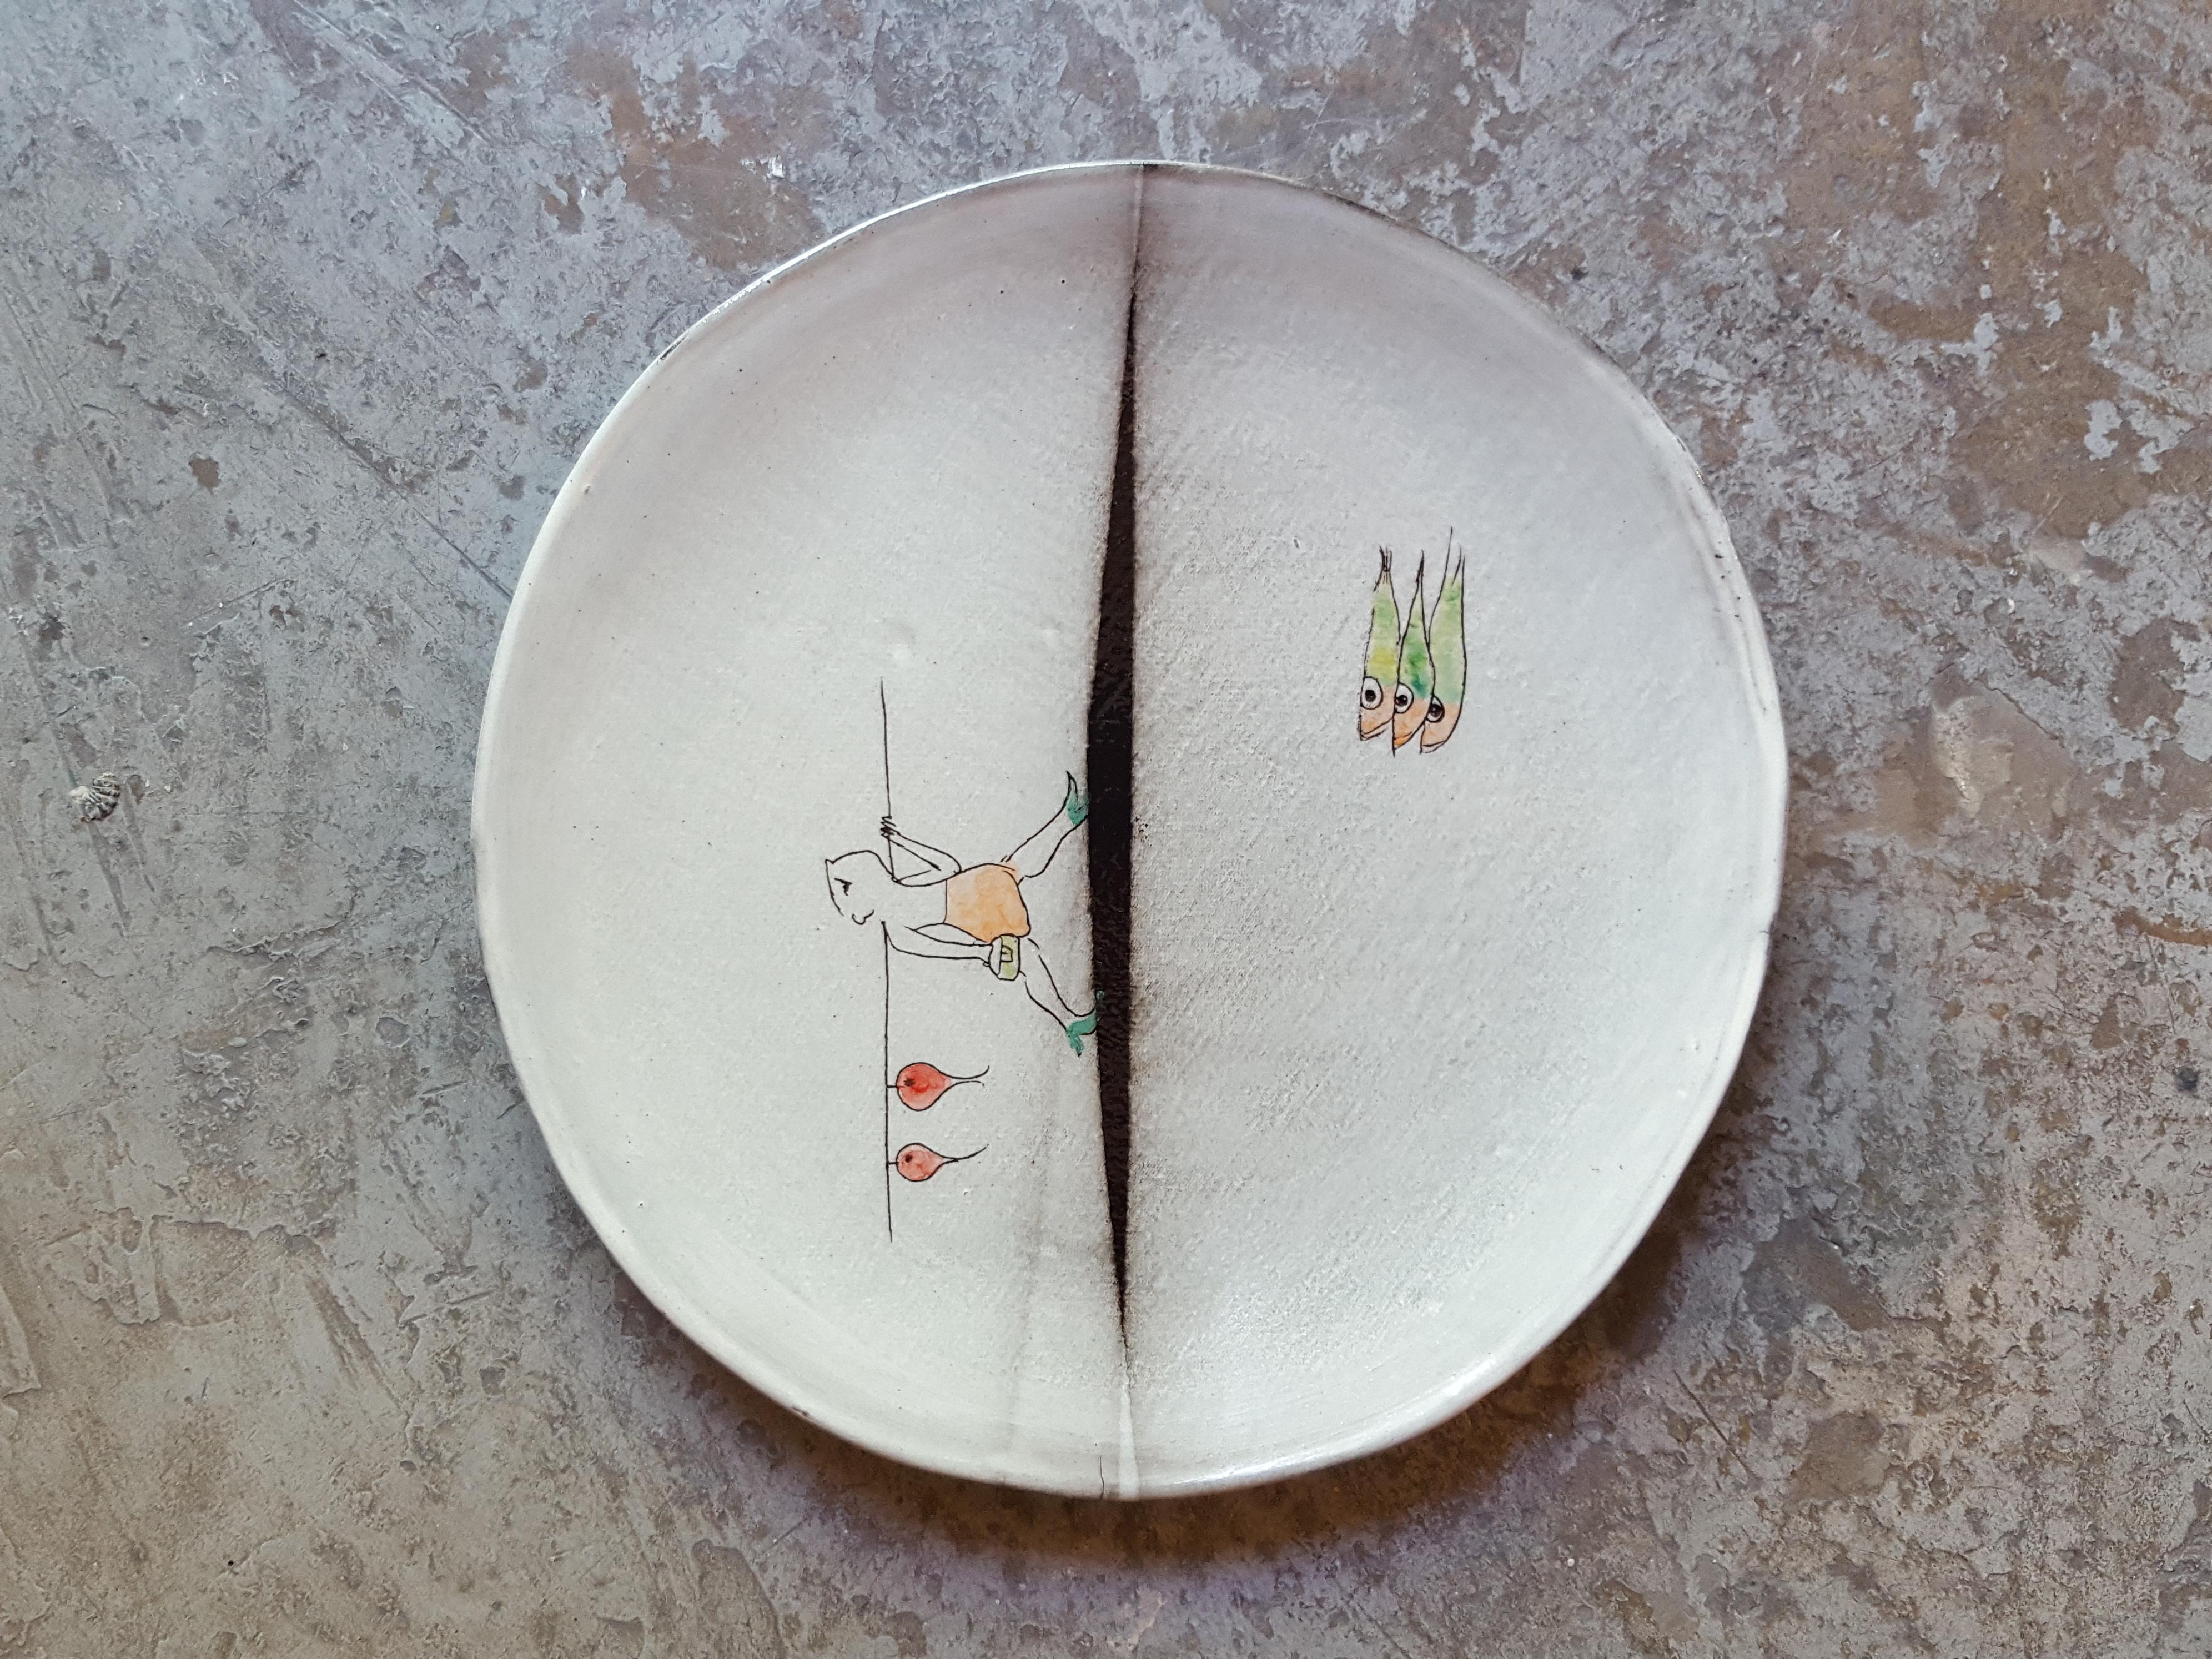 Ceramic earthenware Faience dinner plate artist creation, all handmade in France.
Using plaques of dark Faience, graffiti, paint and enamel.
Decoration hand-painted with the artist creative poetic characters limited edition.
There are different